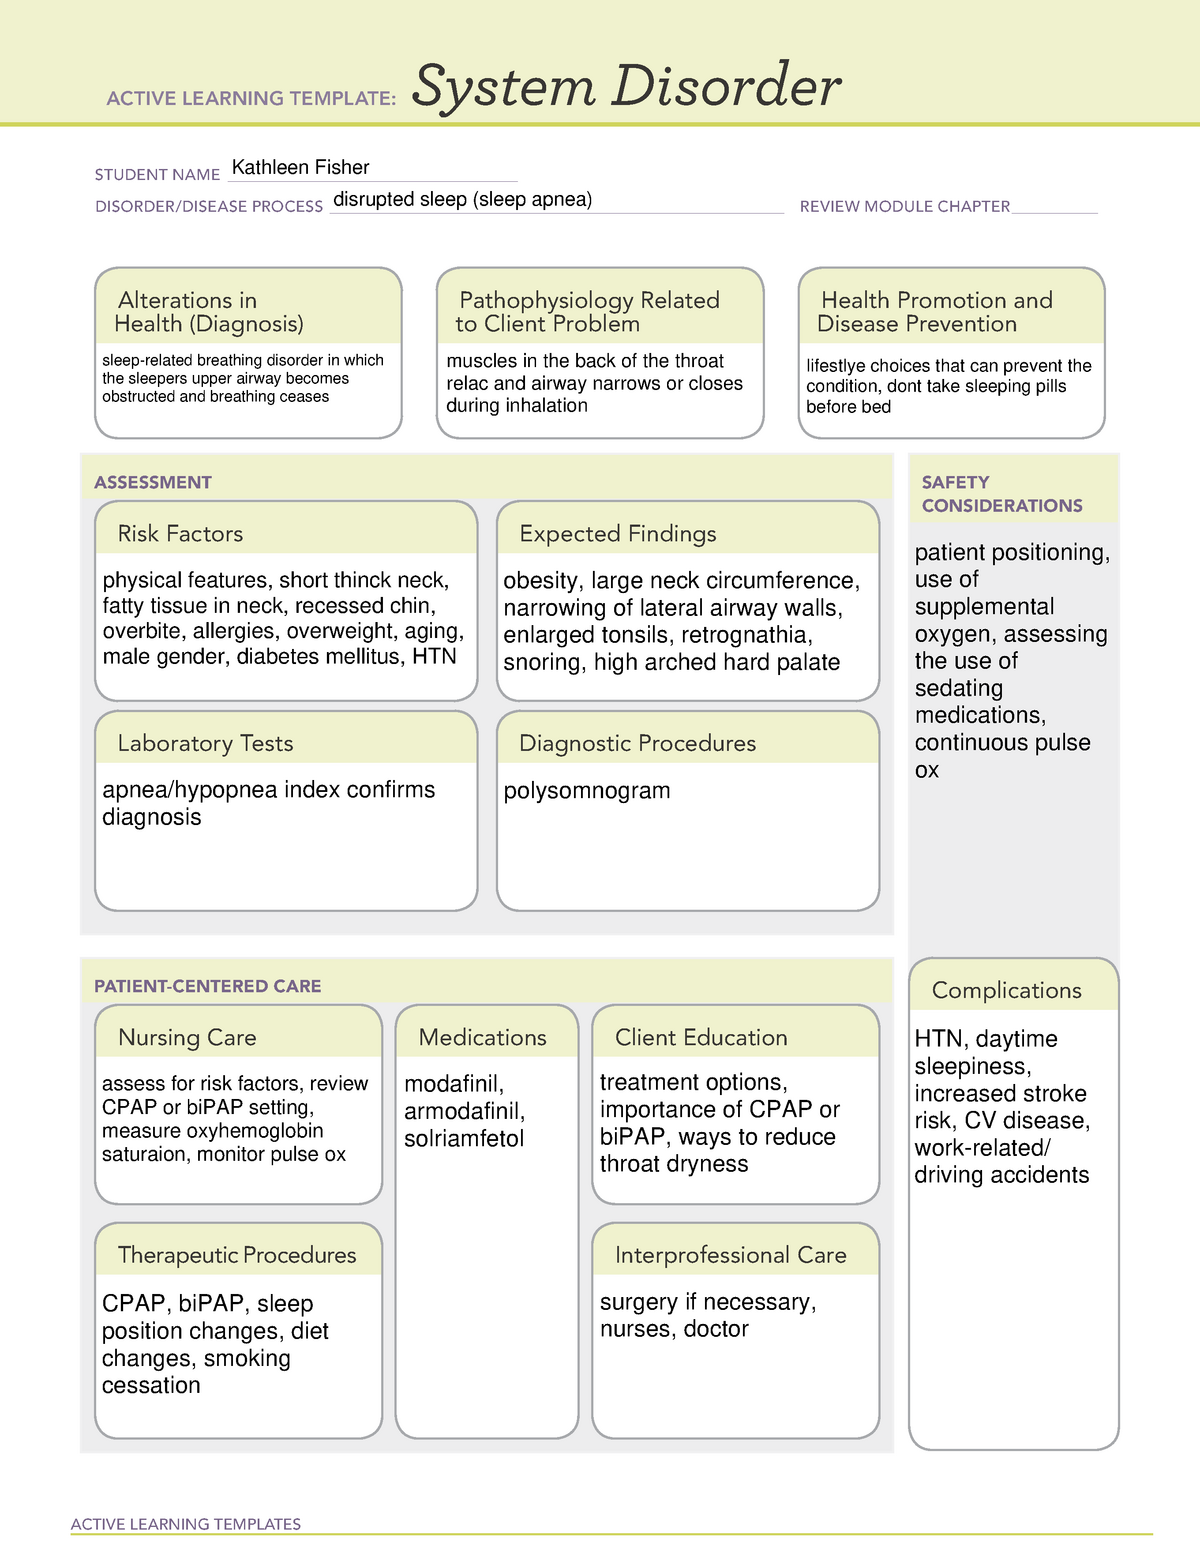 systemdisorder-sleep-ati-medication-system-template-active-learning